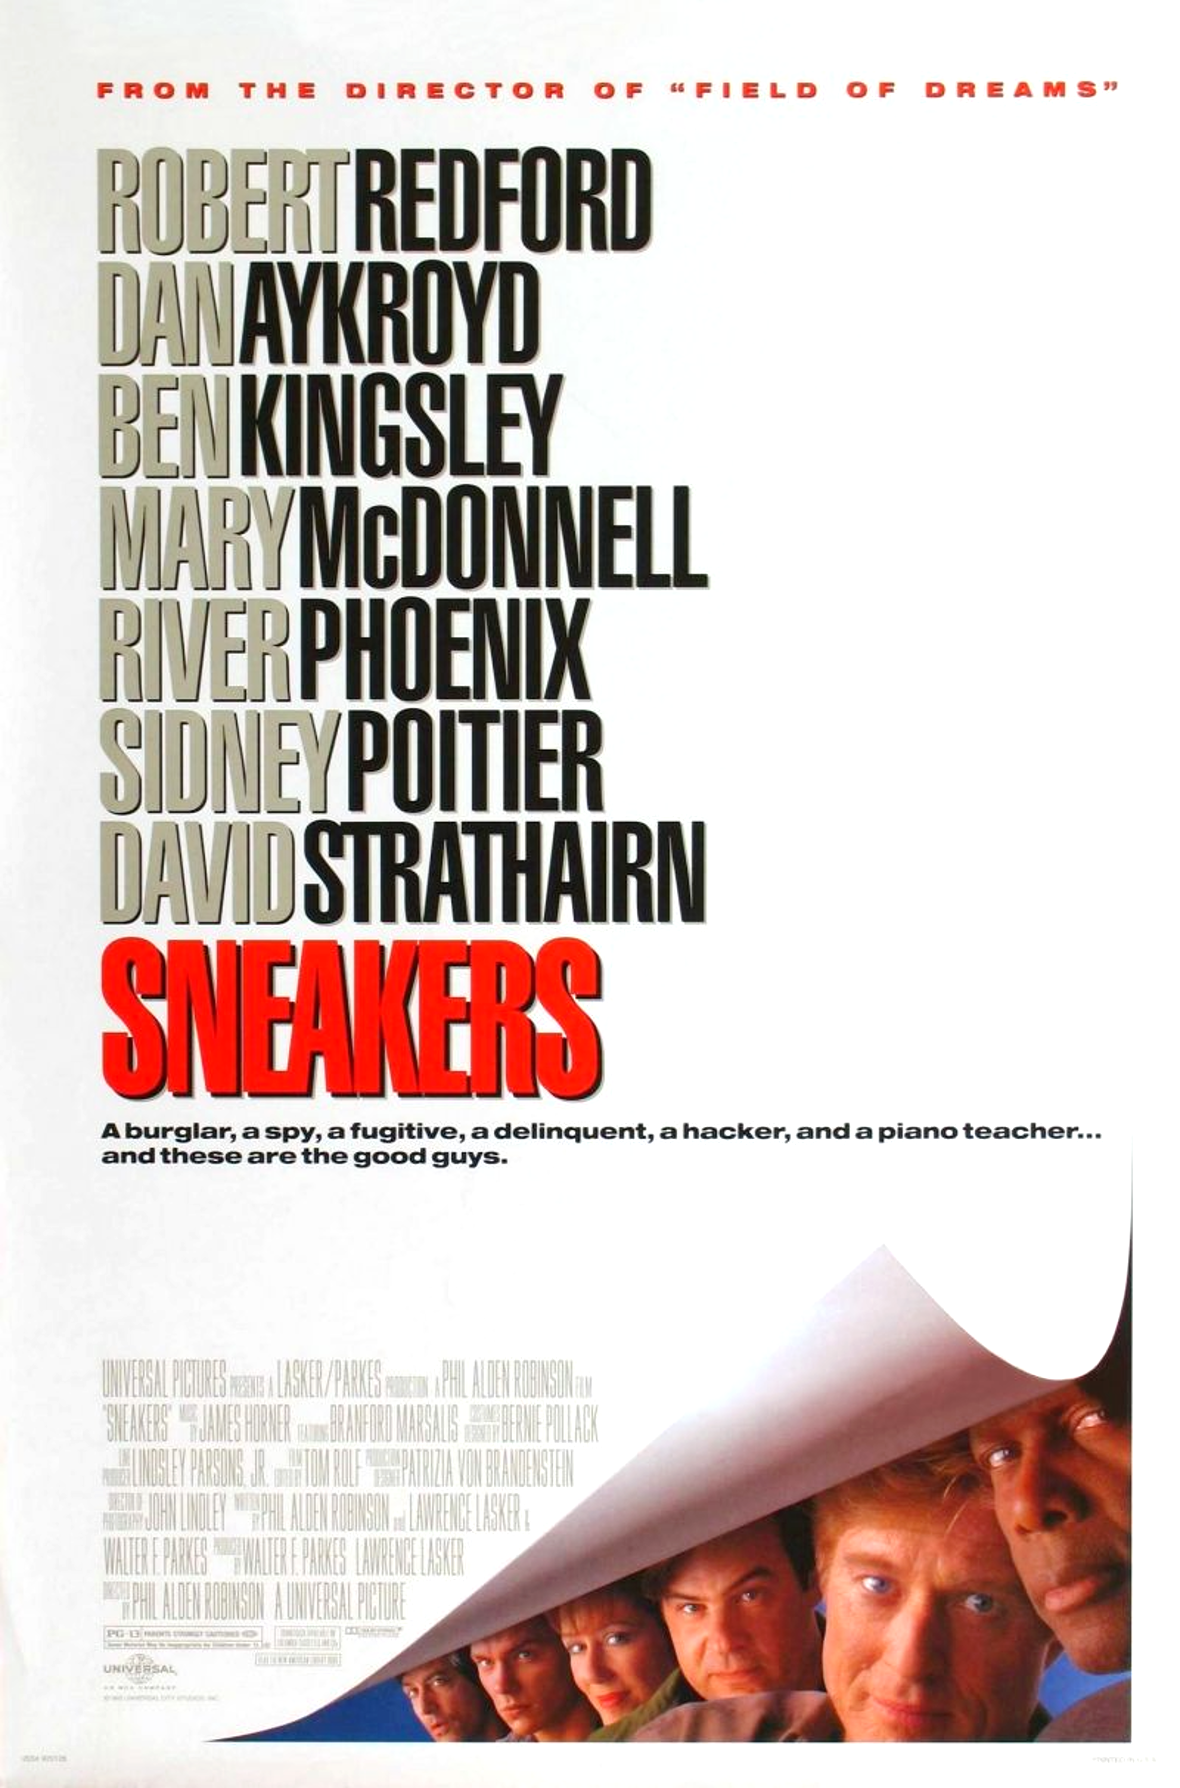 Image of Sneakers (1992) movie poster.